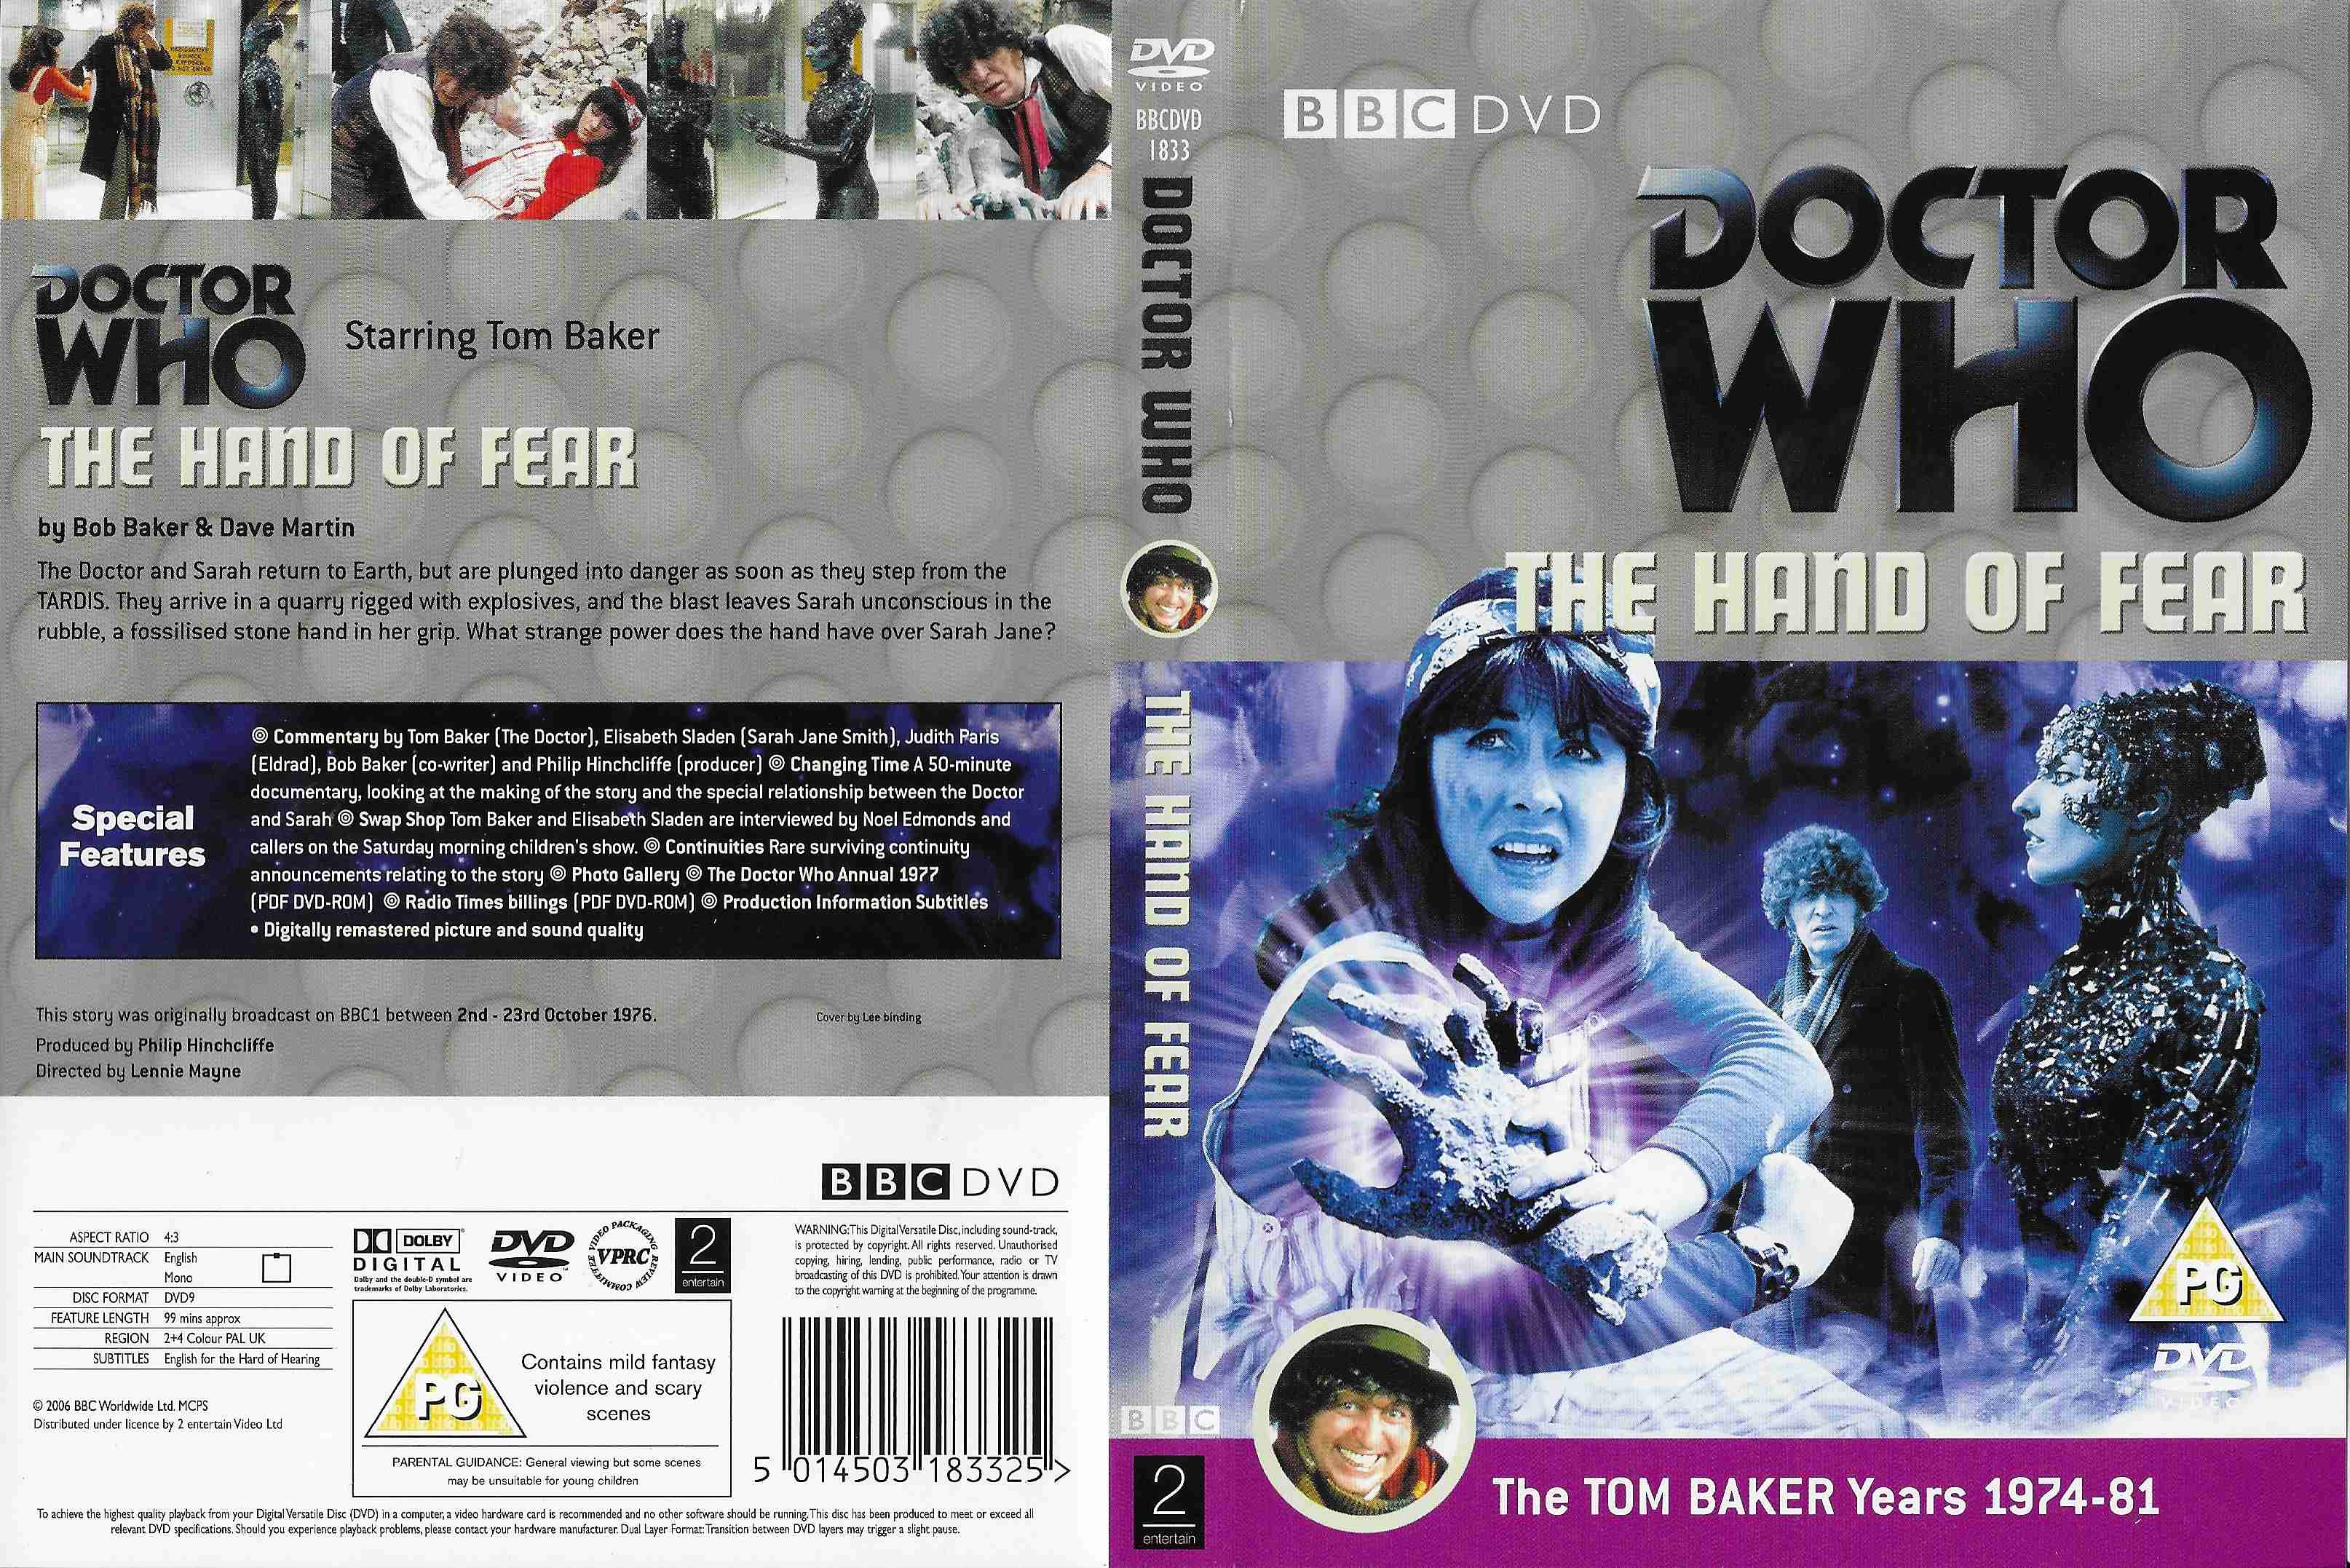 Picture of BBCDVD 1833 Doctor Who - The hand of fear by artist Bob Baker / Dave Martin from the BBC records and Tapes library